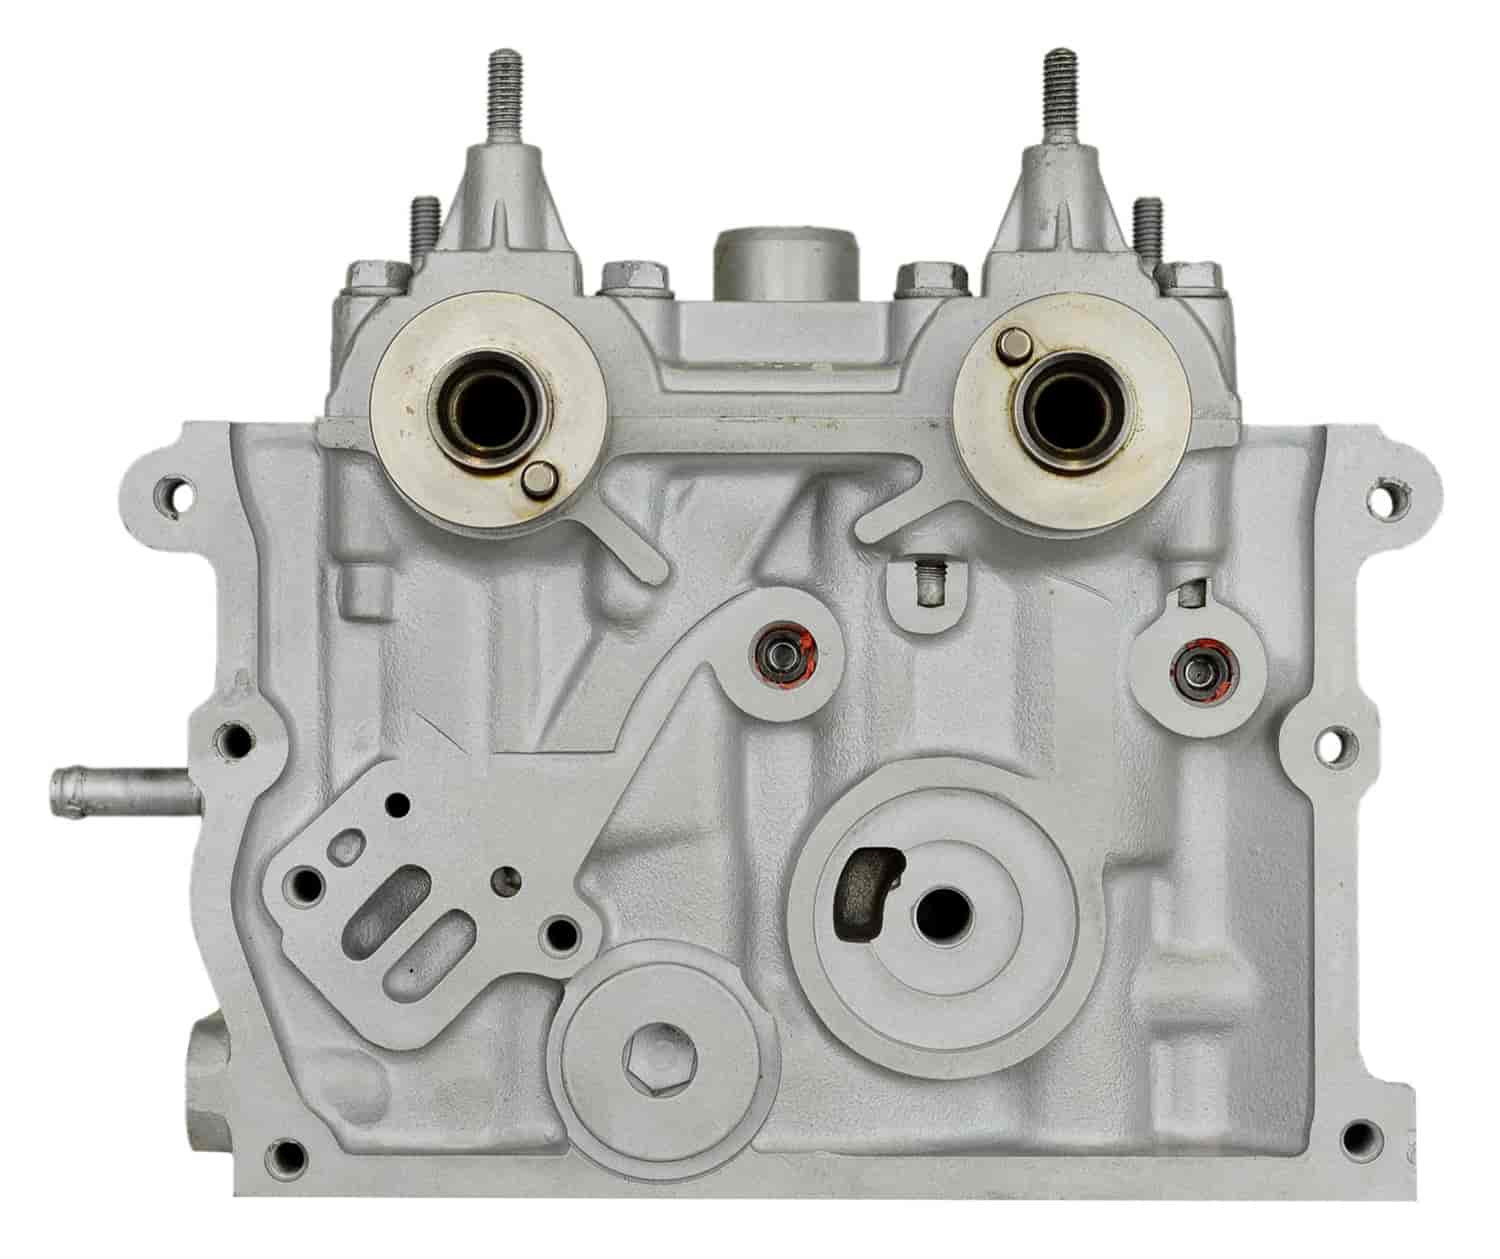 Remanufactured Crate Engine for 1999-2003 Chevy/Suzuki with 2.0L L4